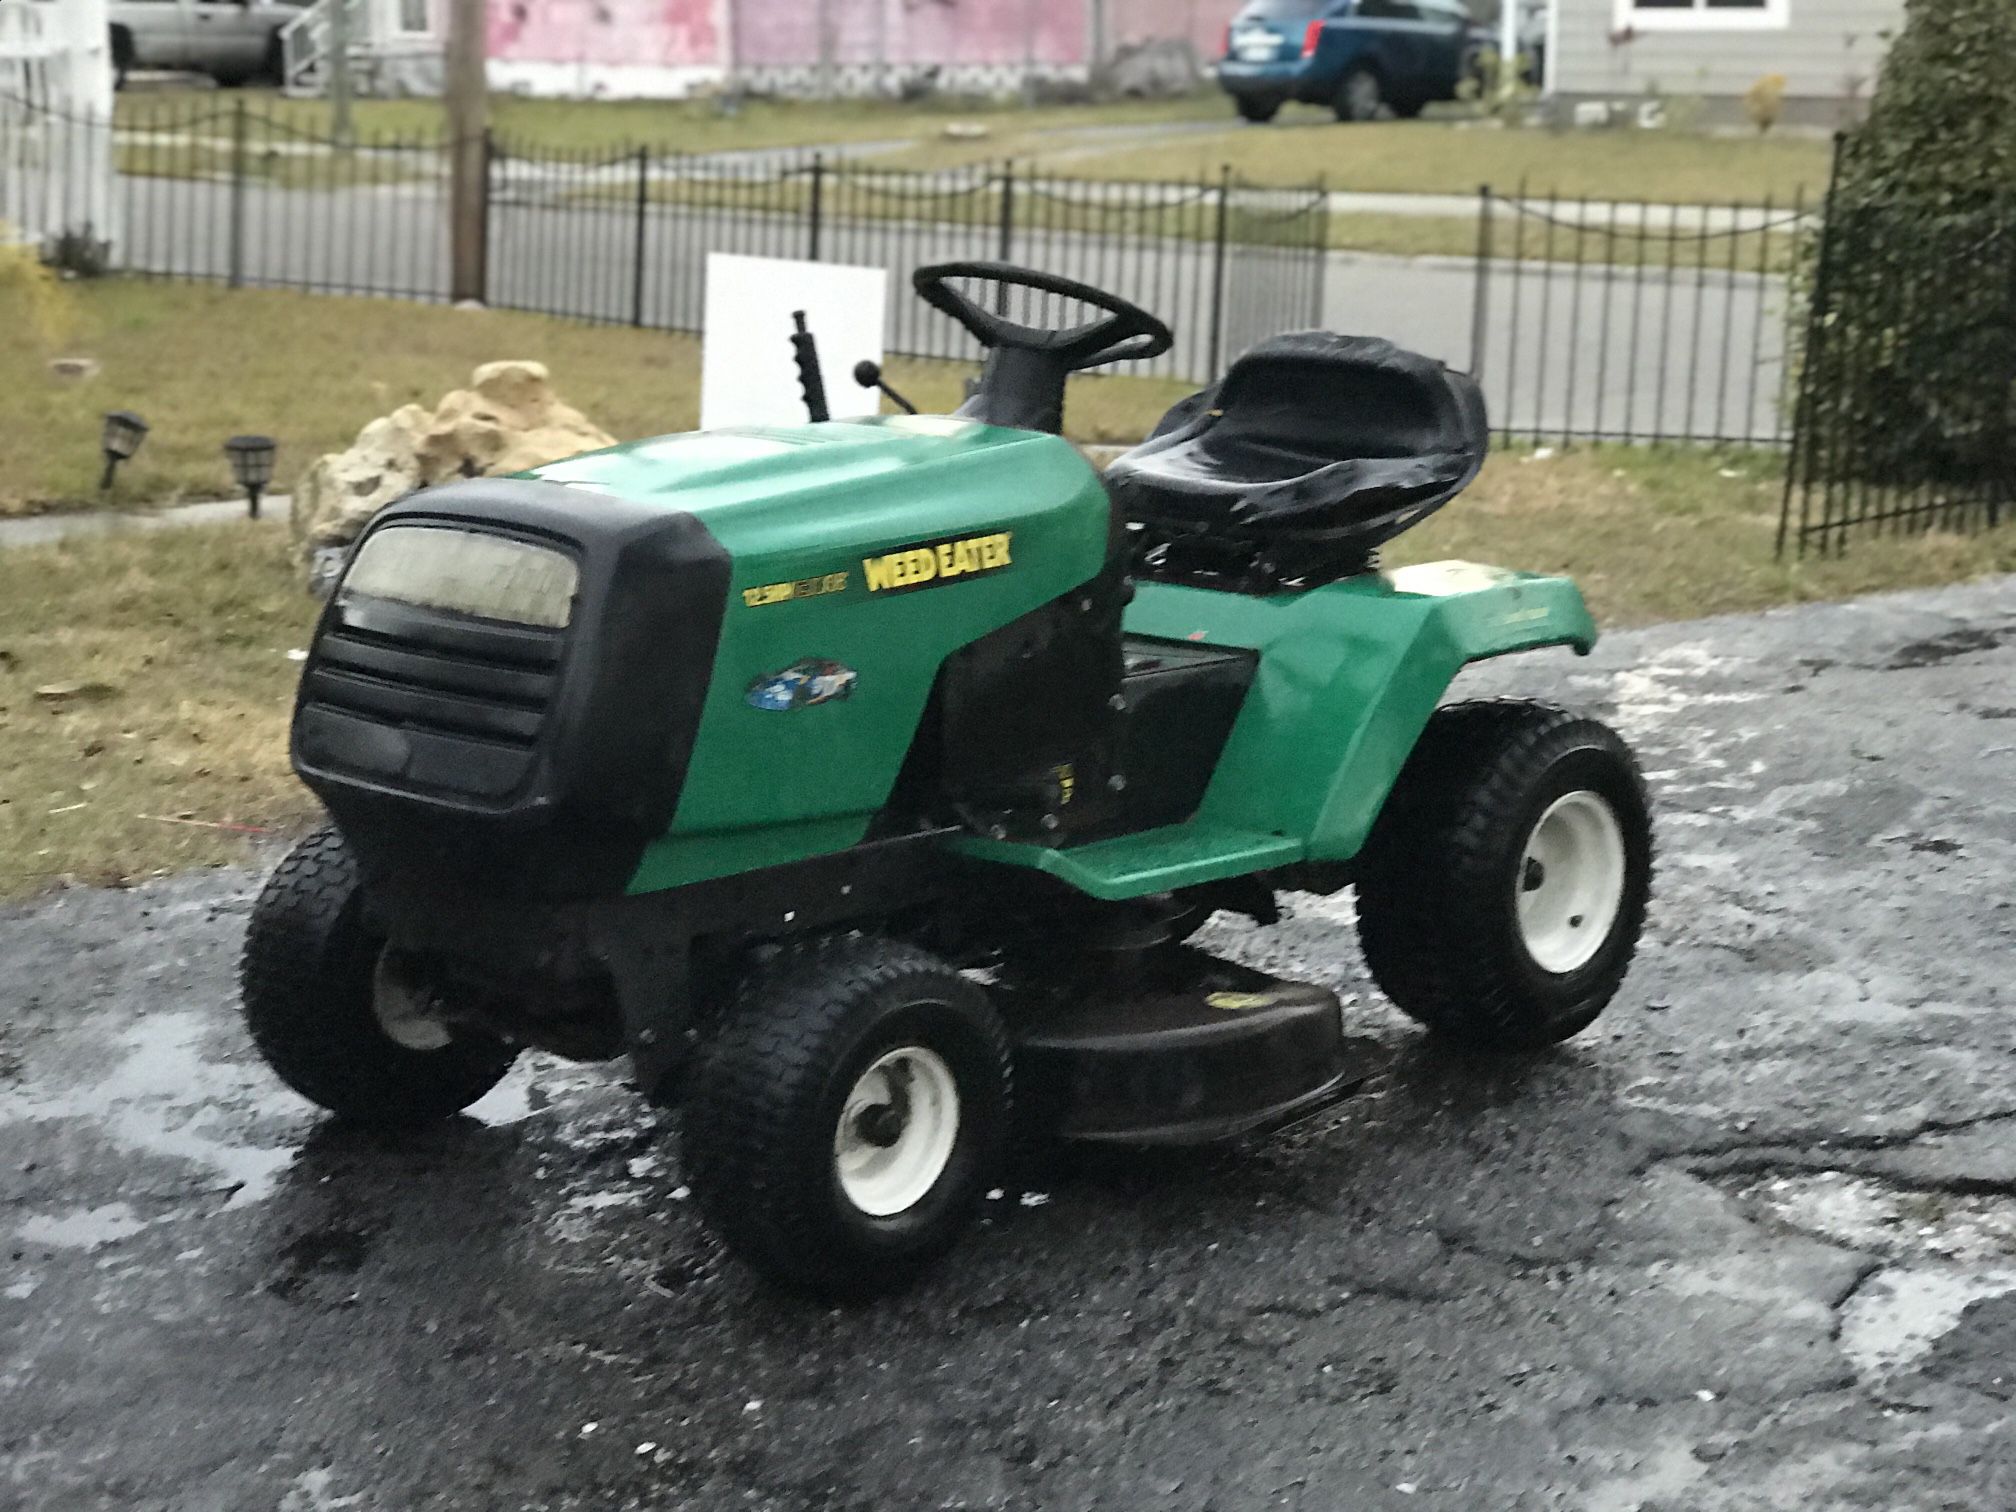 Weed Eater Riding Mower 38inch Deck 12.5hp